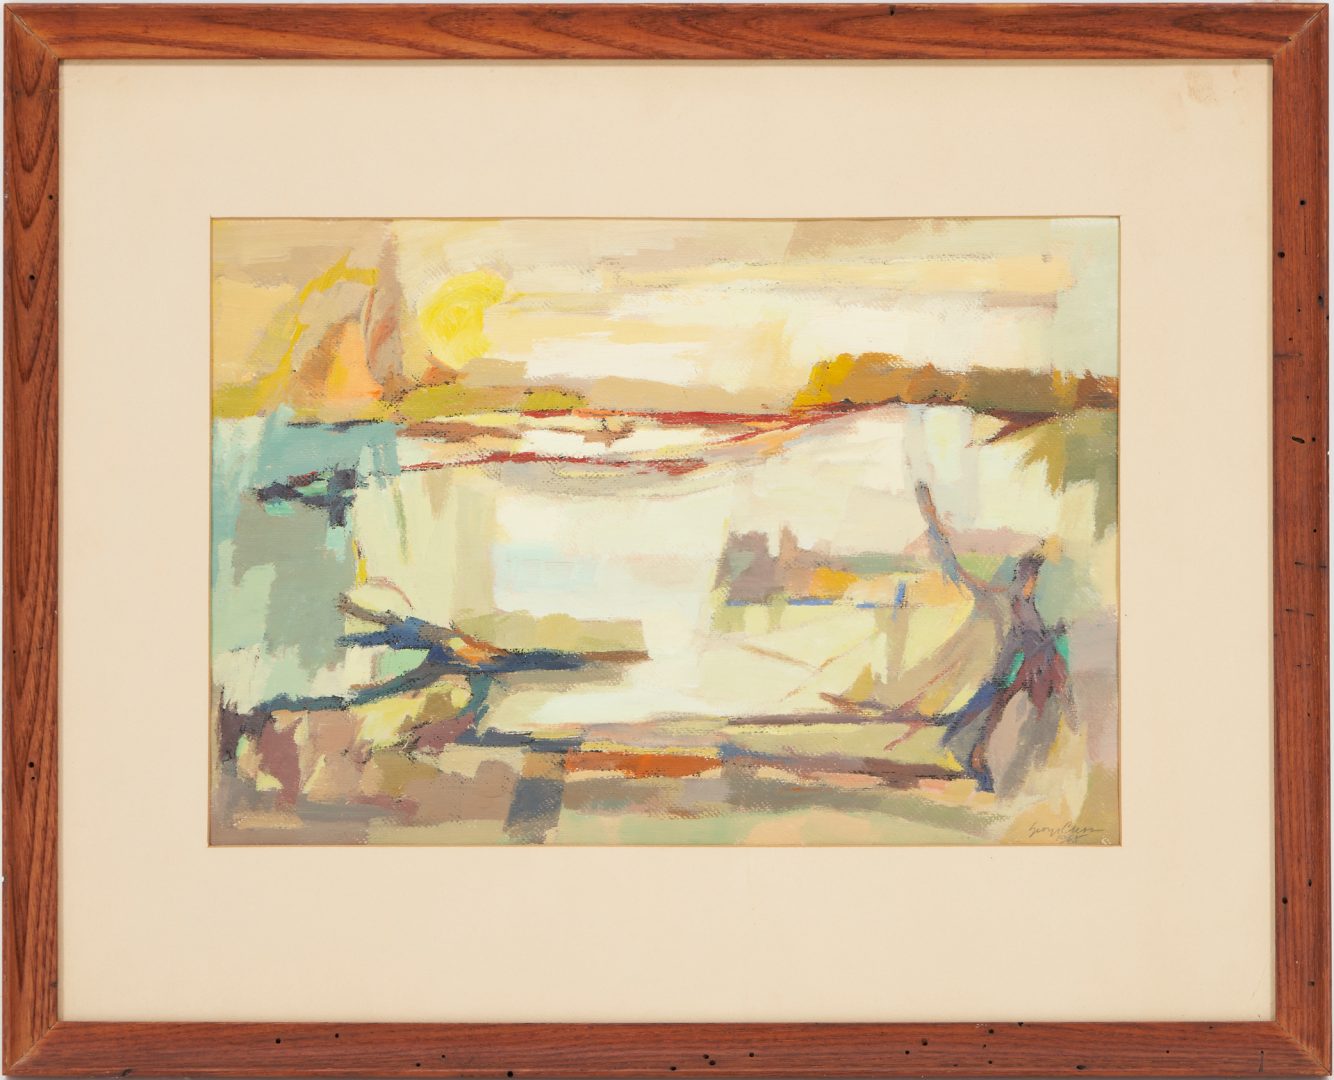 Lot 572: George Cress Abstract Landscape Painting, Inlet Sunrise No. 1